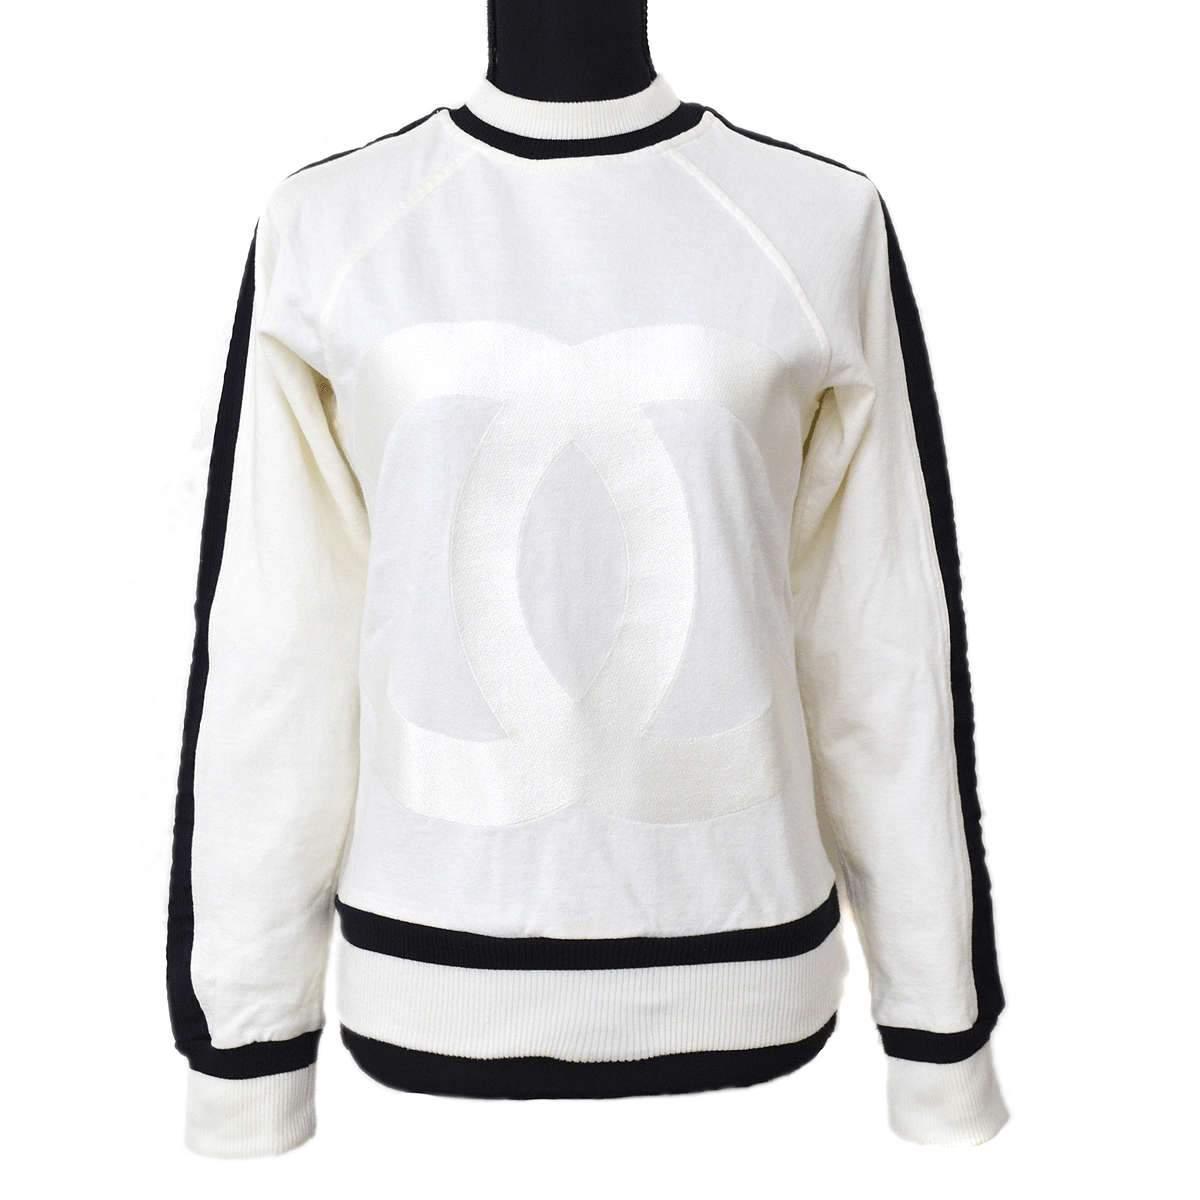 Chanel 2008 Spring Contrast Trim Jumper #34 in White